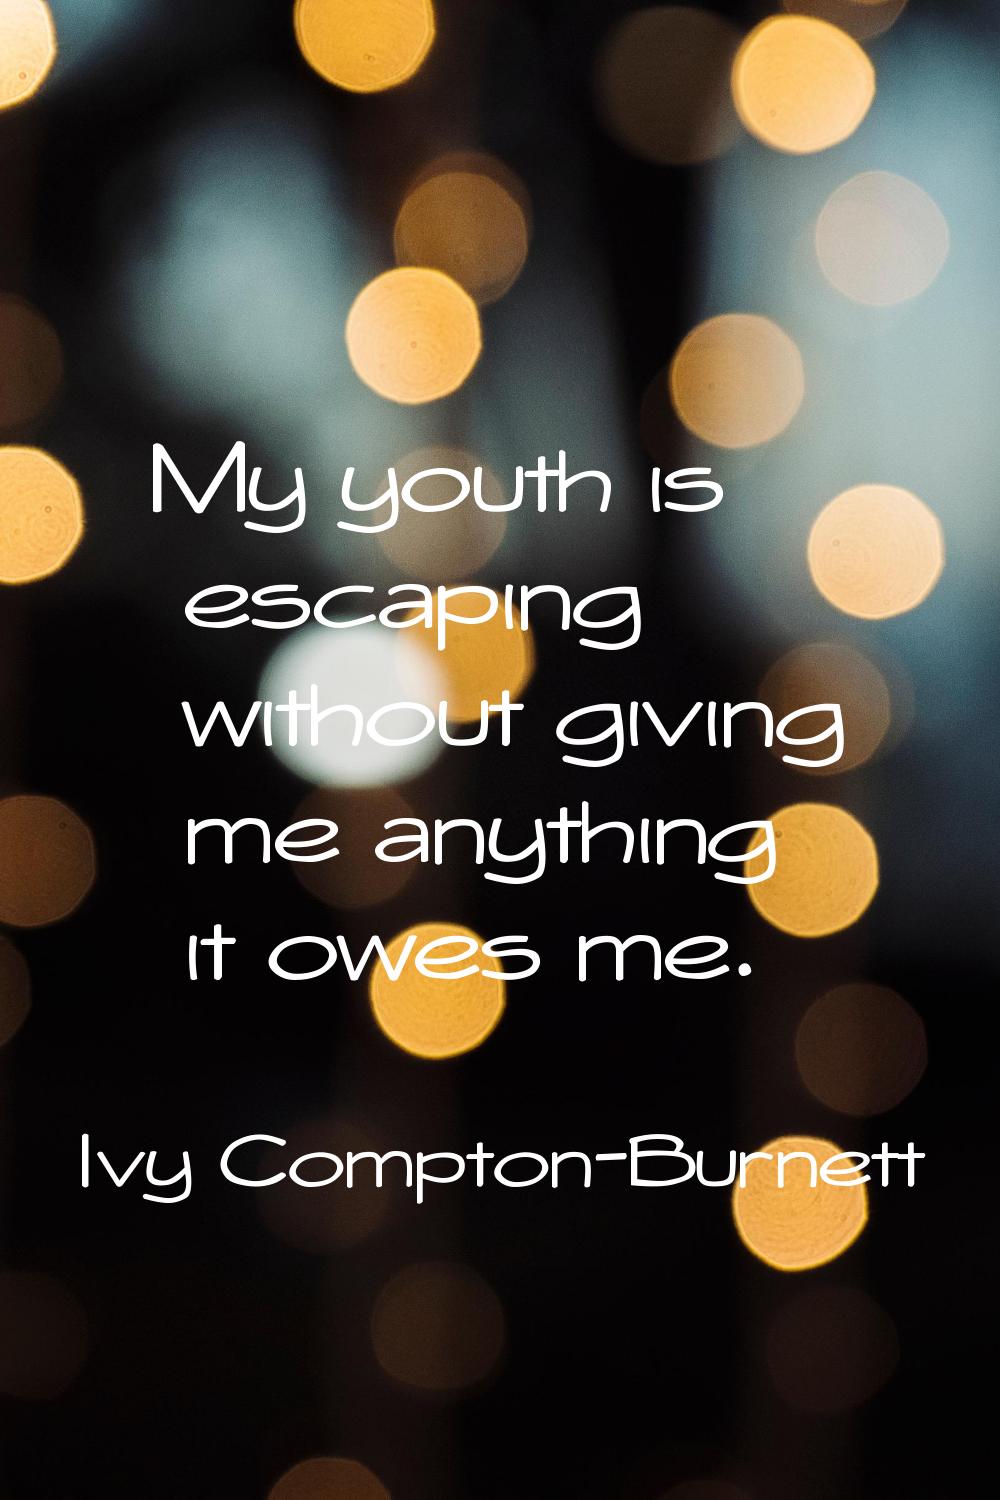 My youth is escaping without giving me anything it owes me.